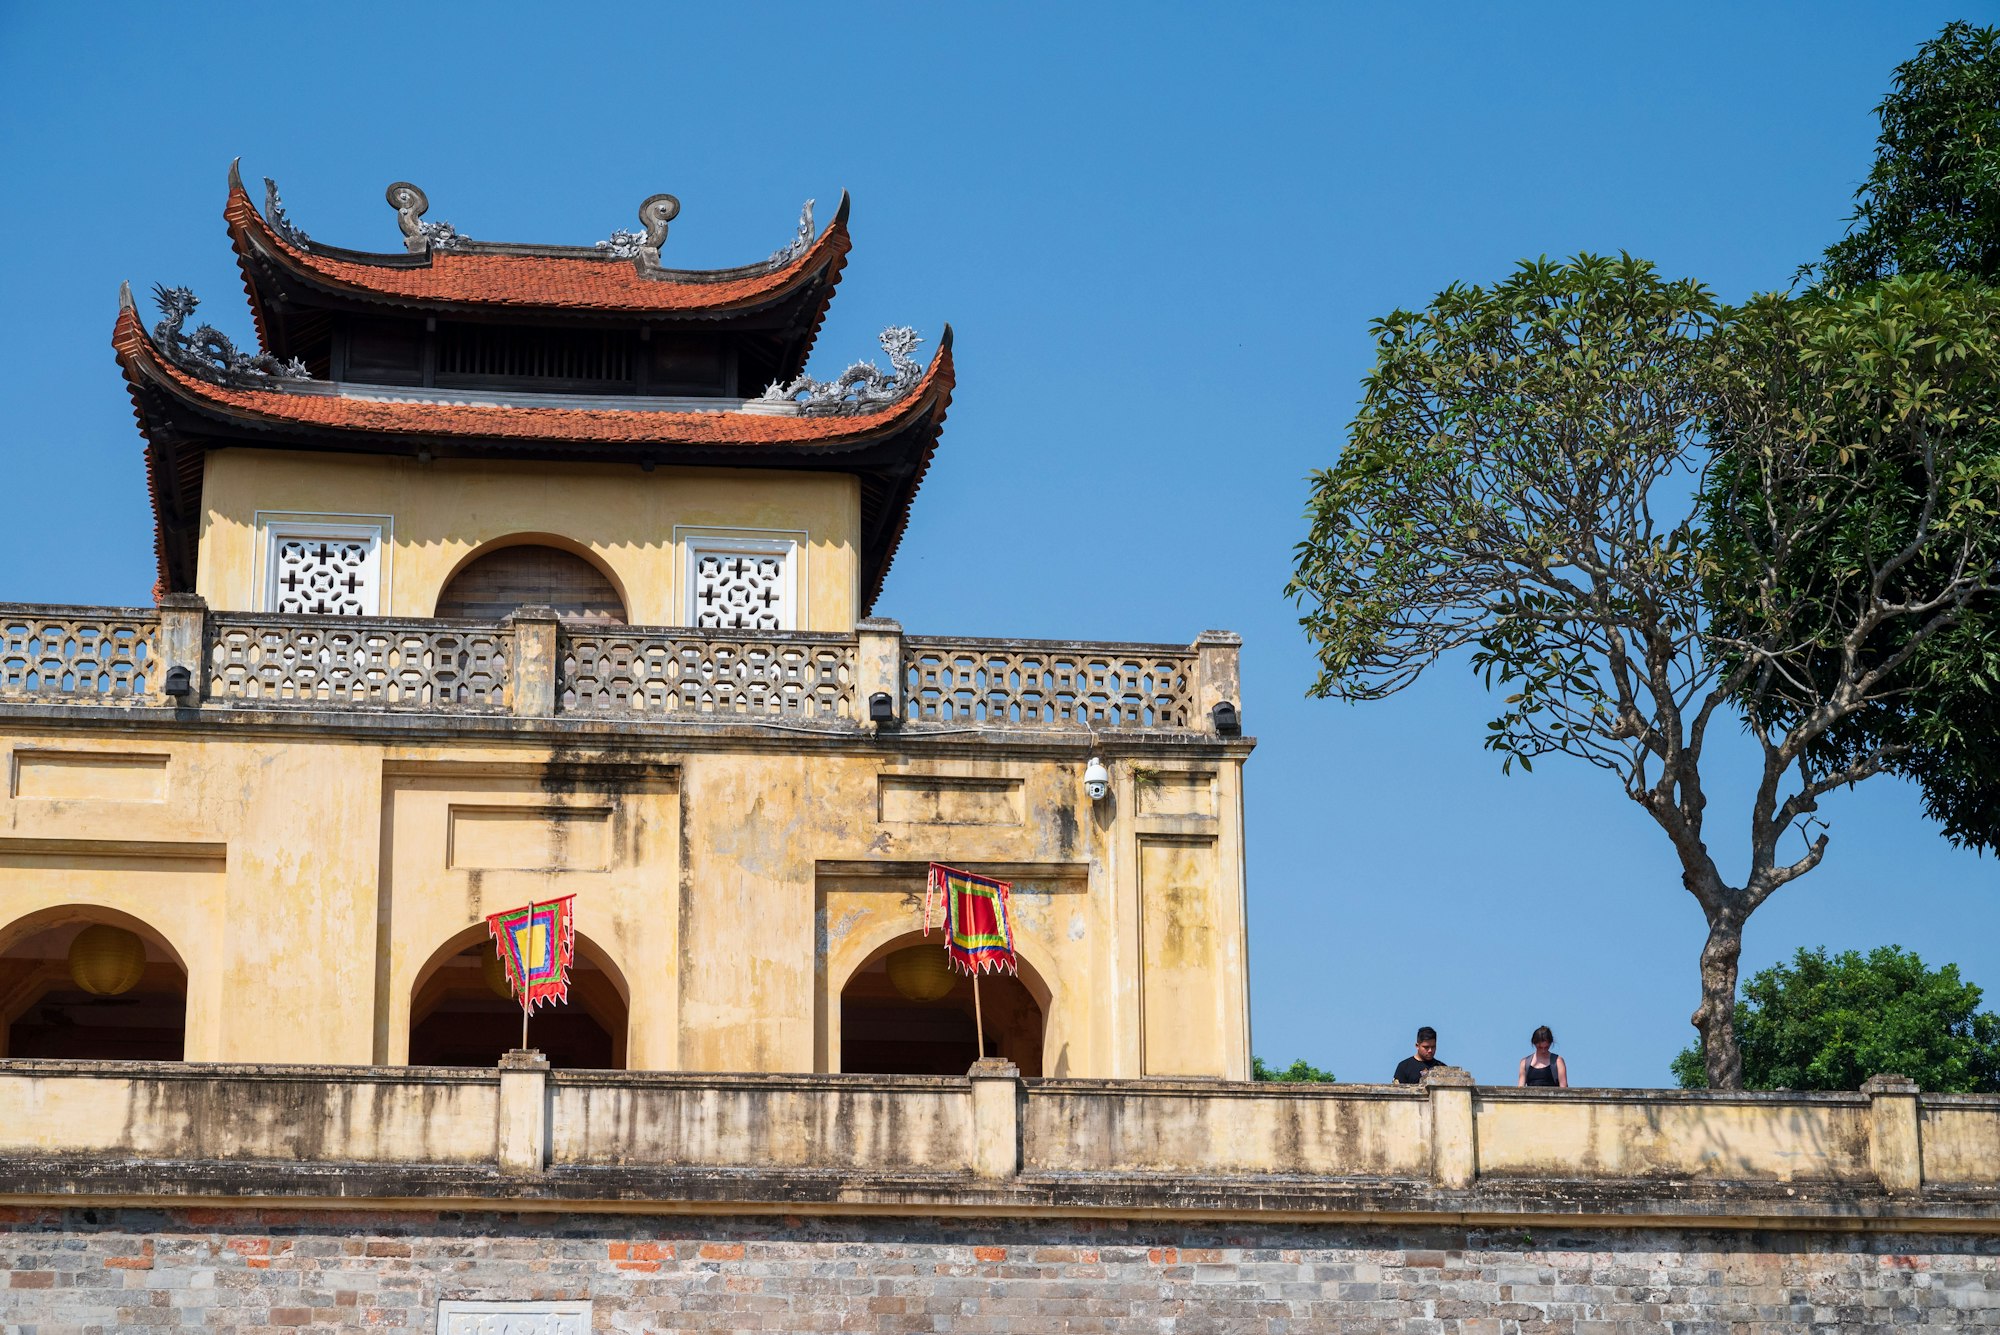 The Secret Imperial Citadel of Thang Long in Hanoi